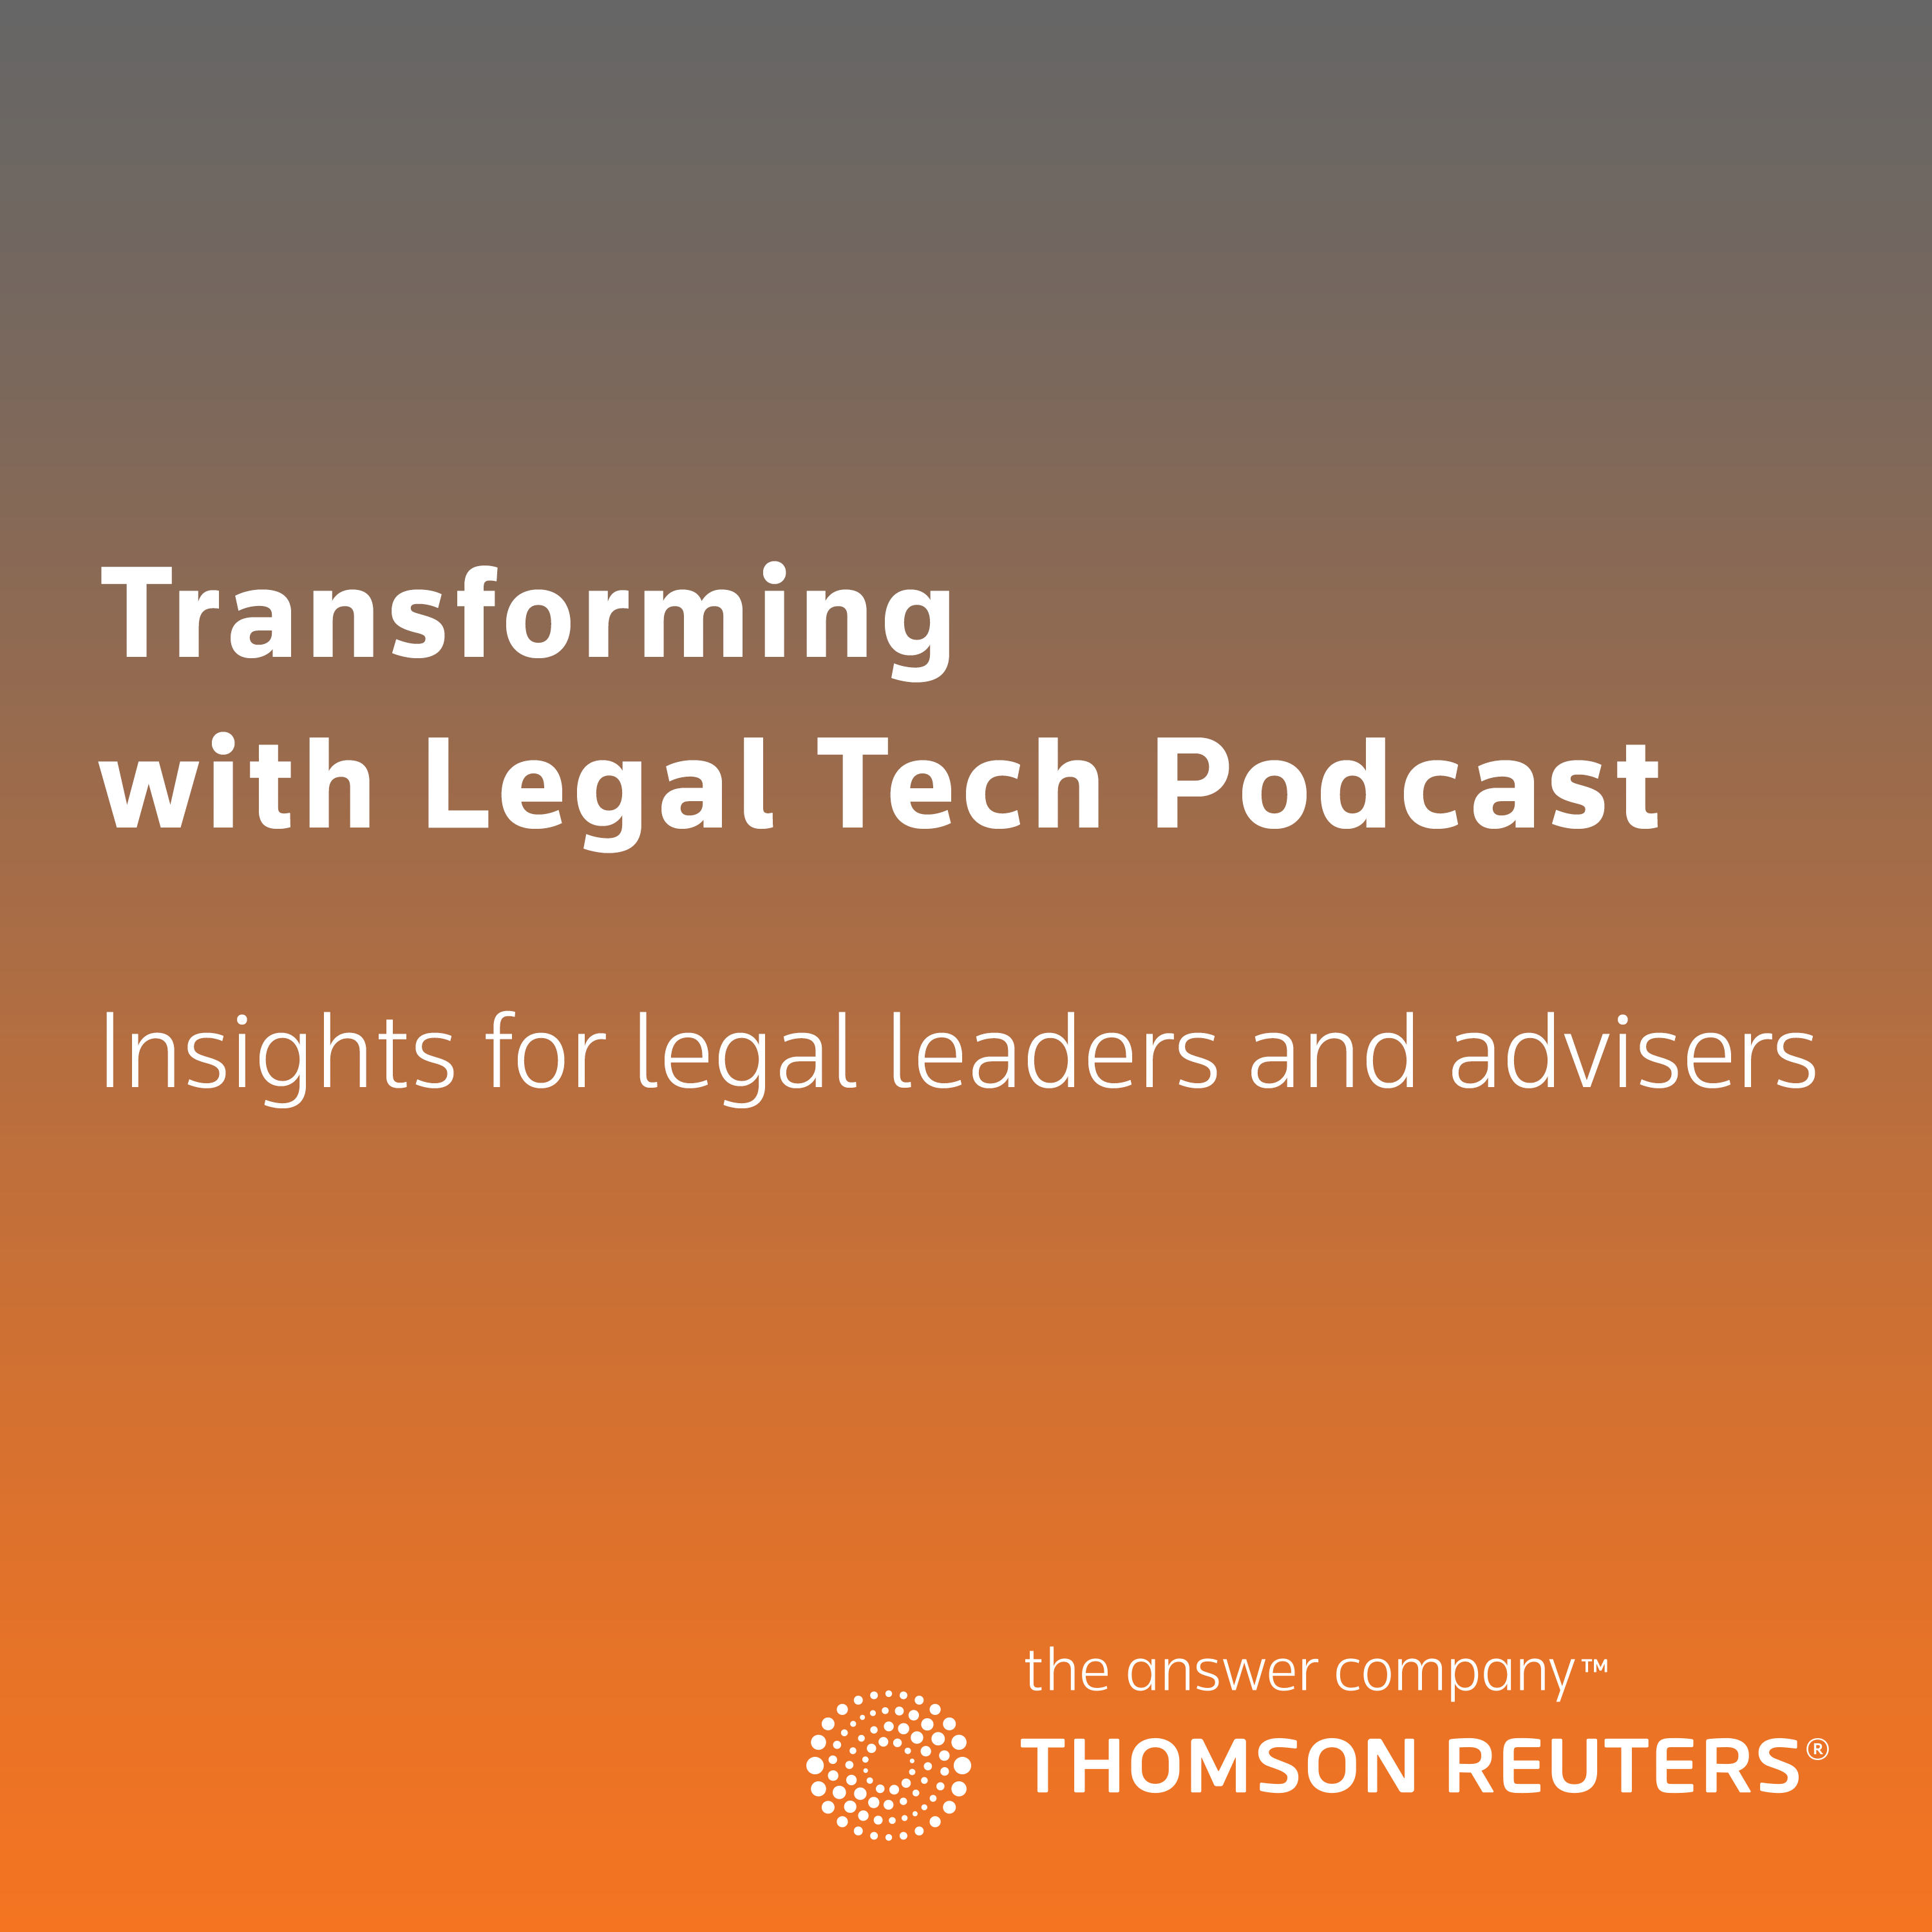 Artwork for podcast Transforming with Legal Tech Podcast